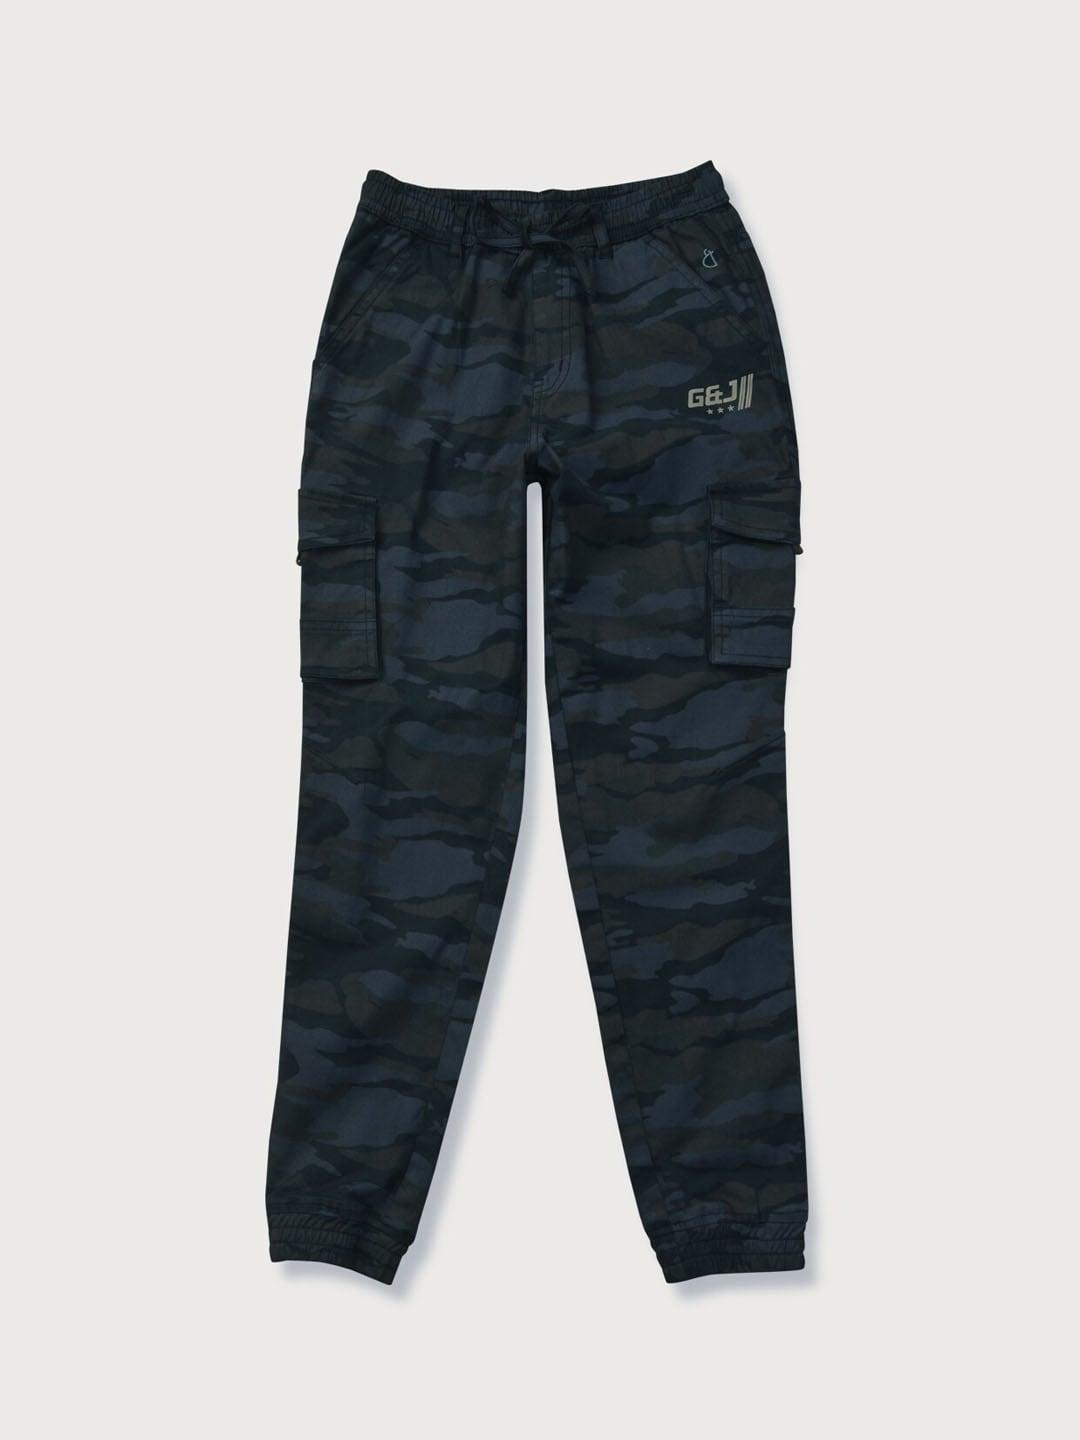 gini-and-jony-boys-navy-blue-camouflage-printed-cargos-trousers